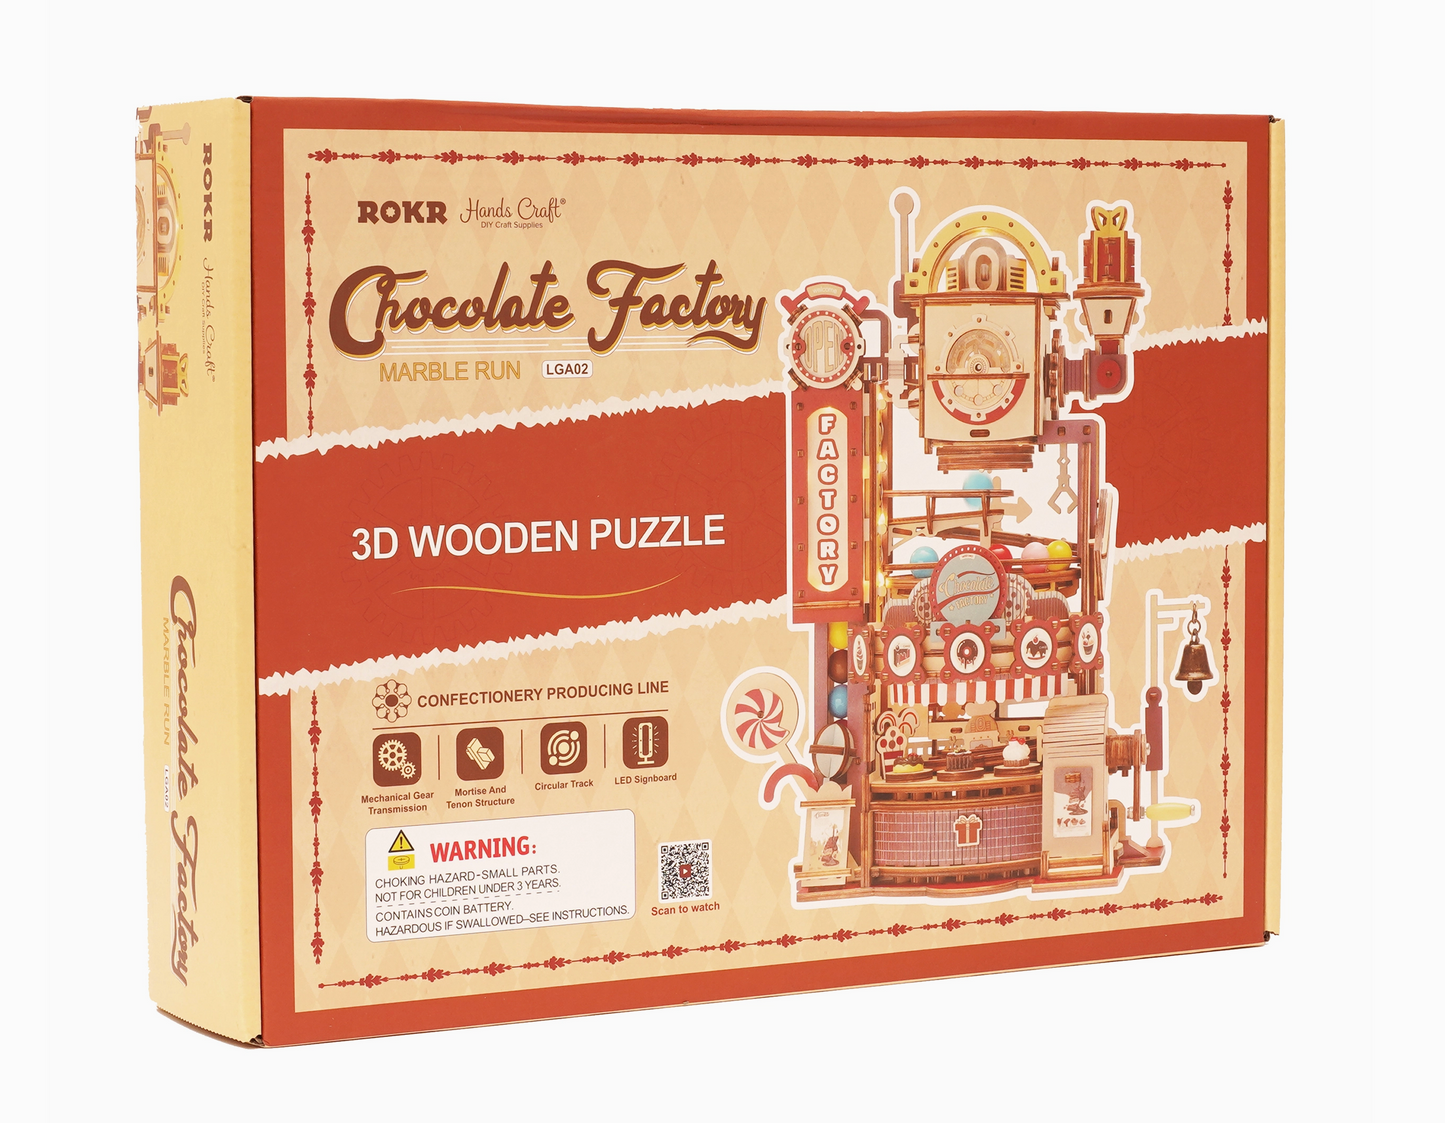 3D Wooden Puzzle - Chocolate Factory Marble Run